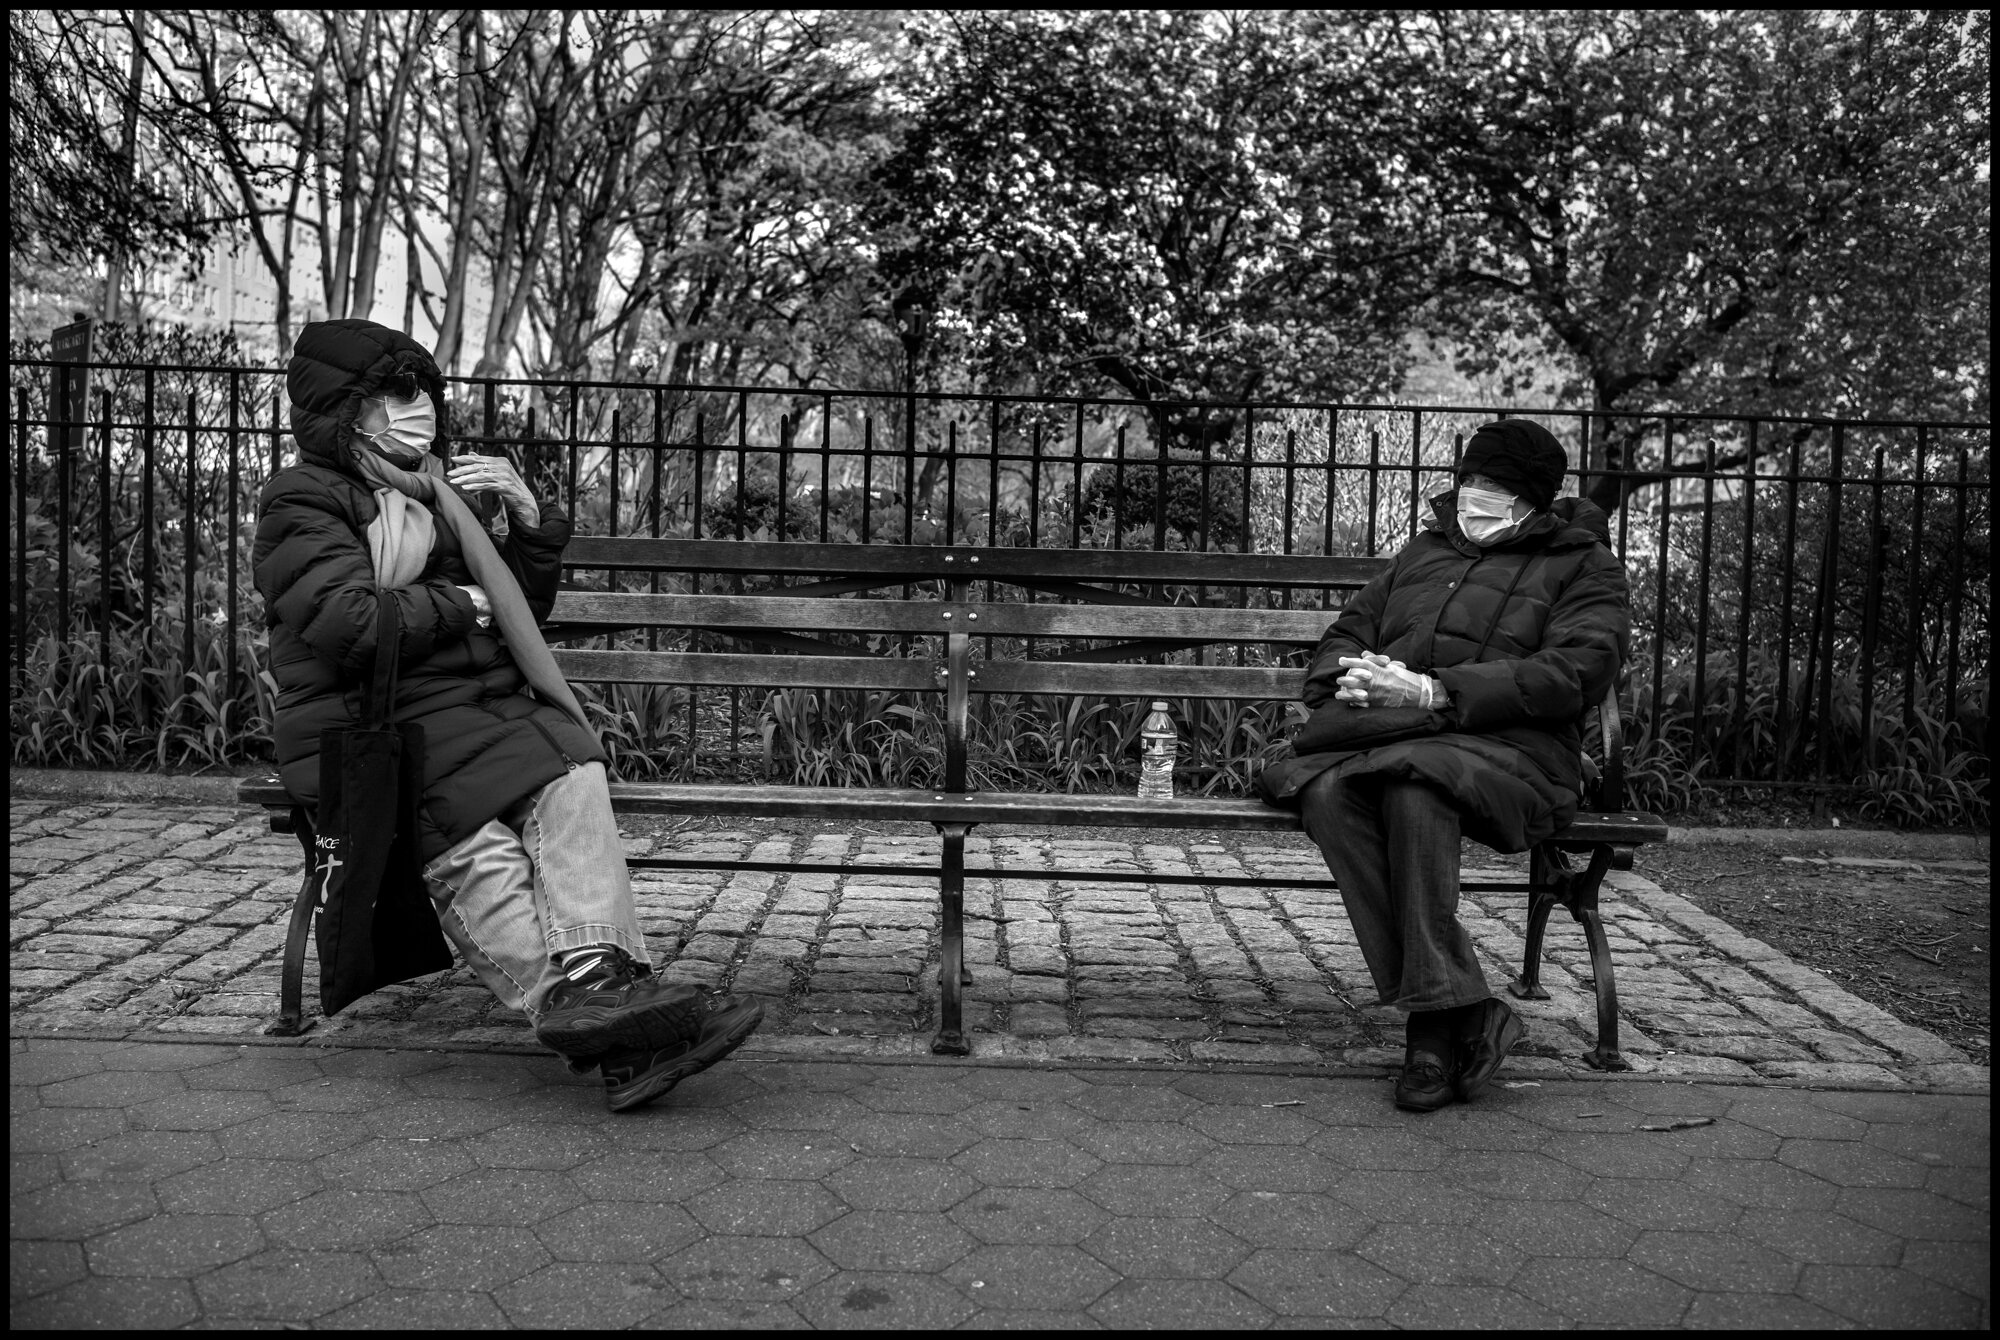  Late in the day, I came across two women, Jocelyn and Dorothy sitting a safe distance apart on a park bench-they’ve been friends for 60 years. They live near each other on the Upper Westside. They told me they call there meetings outside on the benc